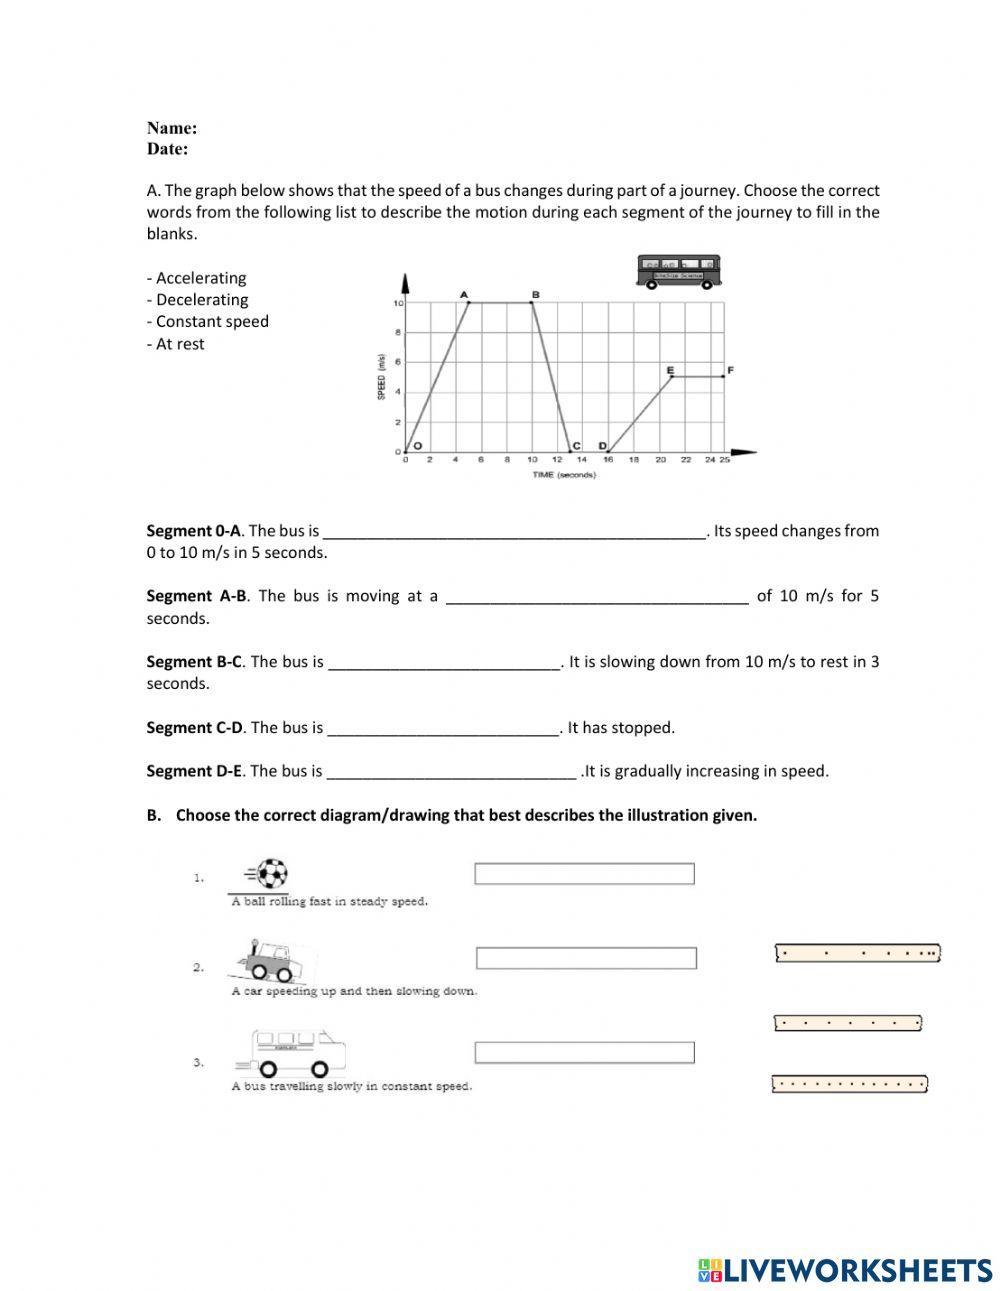 Motion graphs and diagram